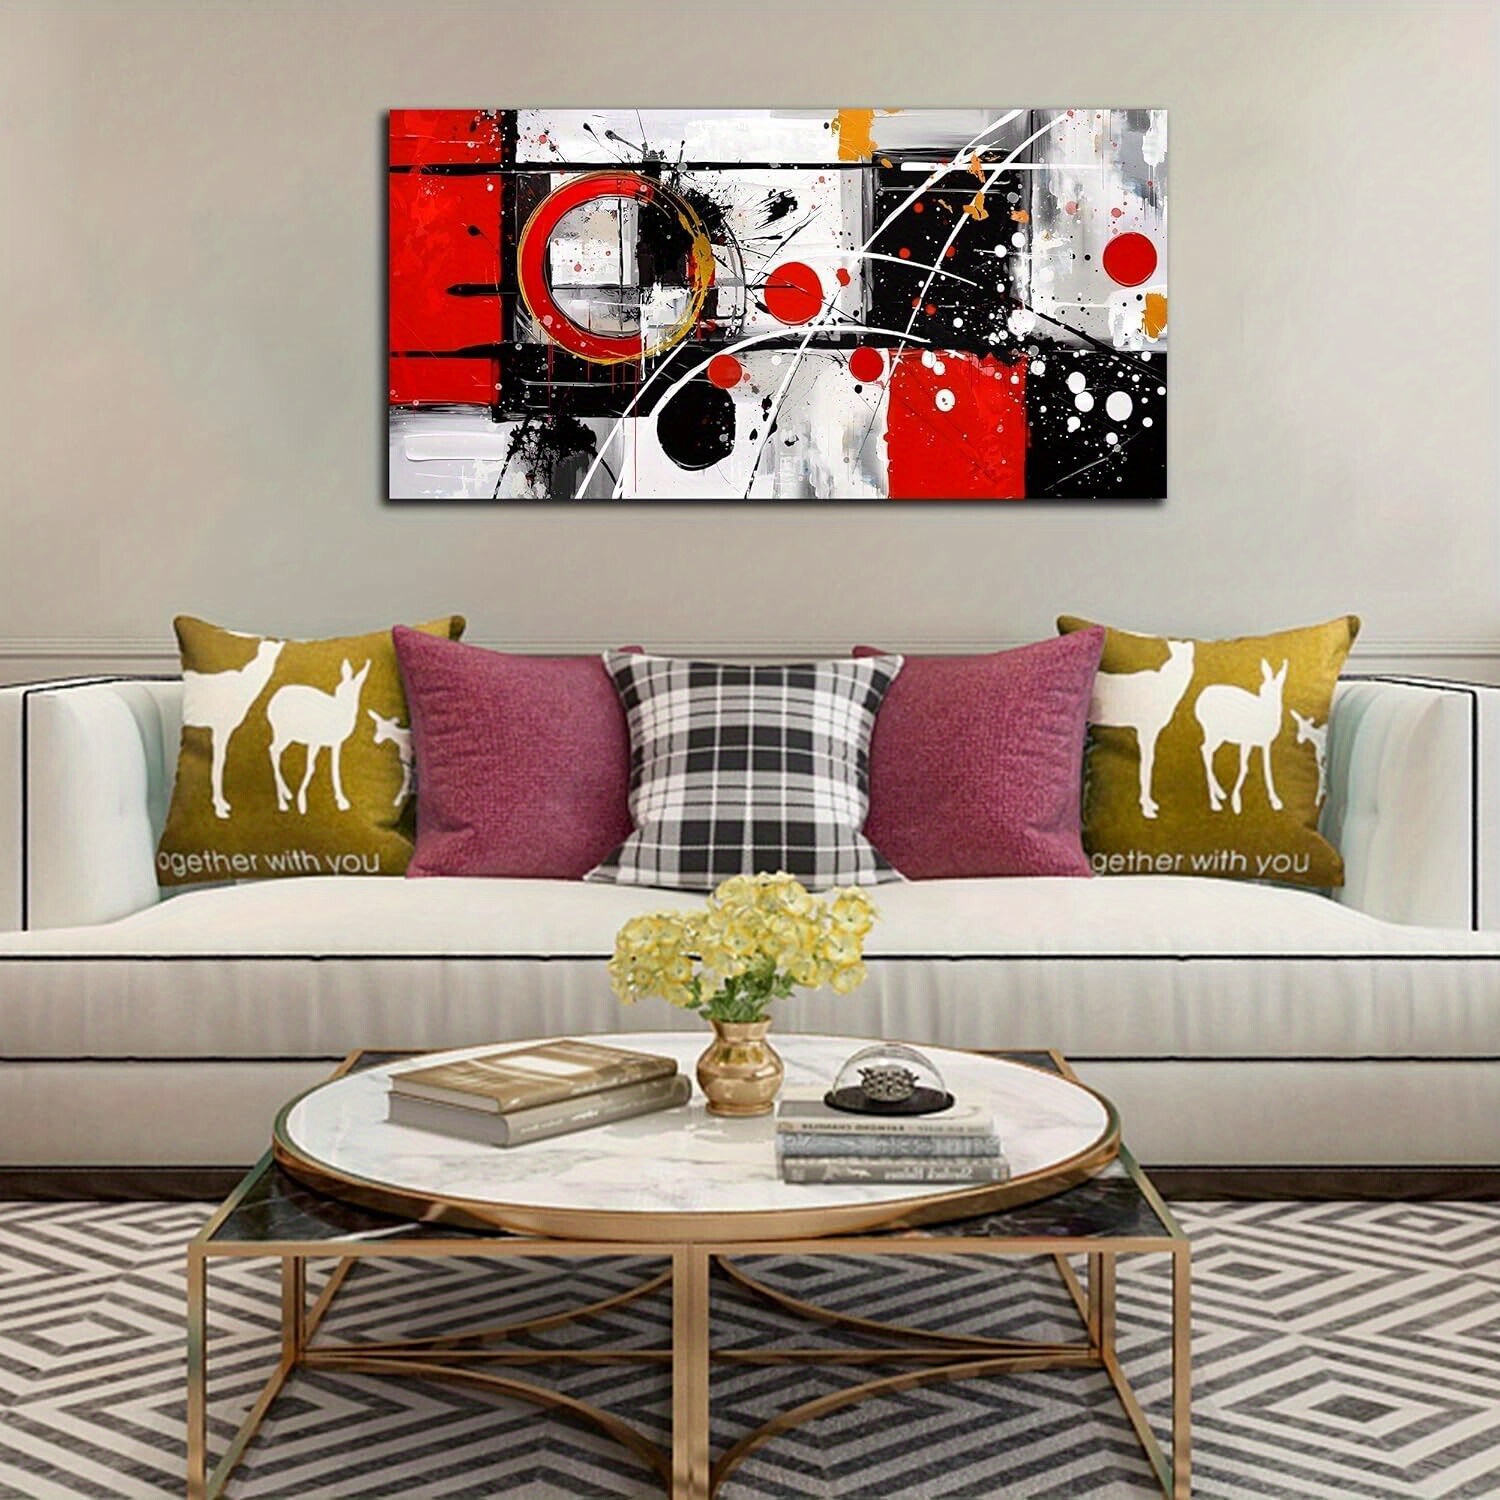 

1pc Large Abstract Canvas Wall Art Red Black White -modern Wall Decor Ready To Hang For Gift, Bedroom, Office, Living Room, Cafe, Bar, Wall Decor, Home And Dormitory Decoration - Thickness 1.5 Inch